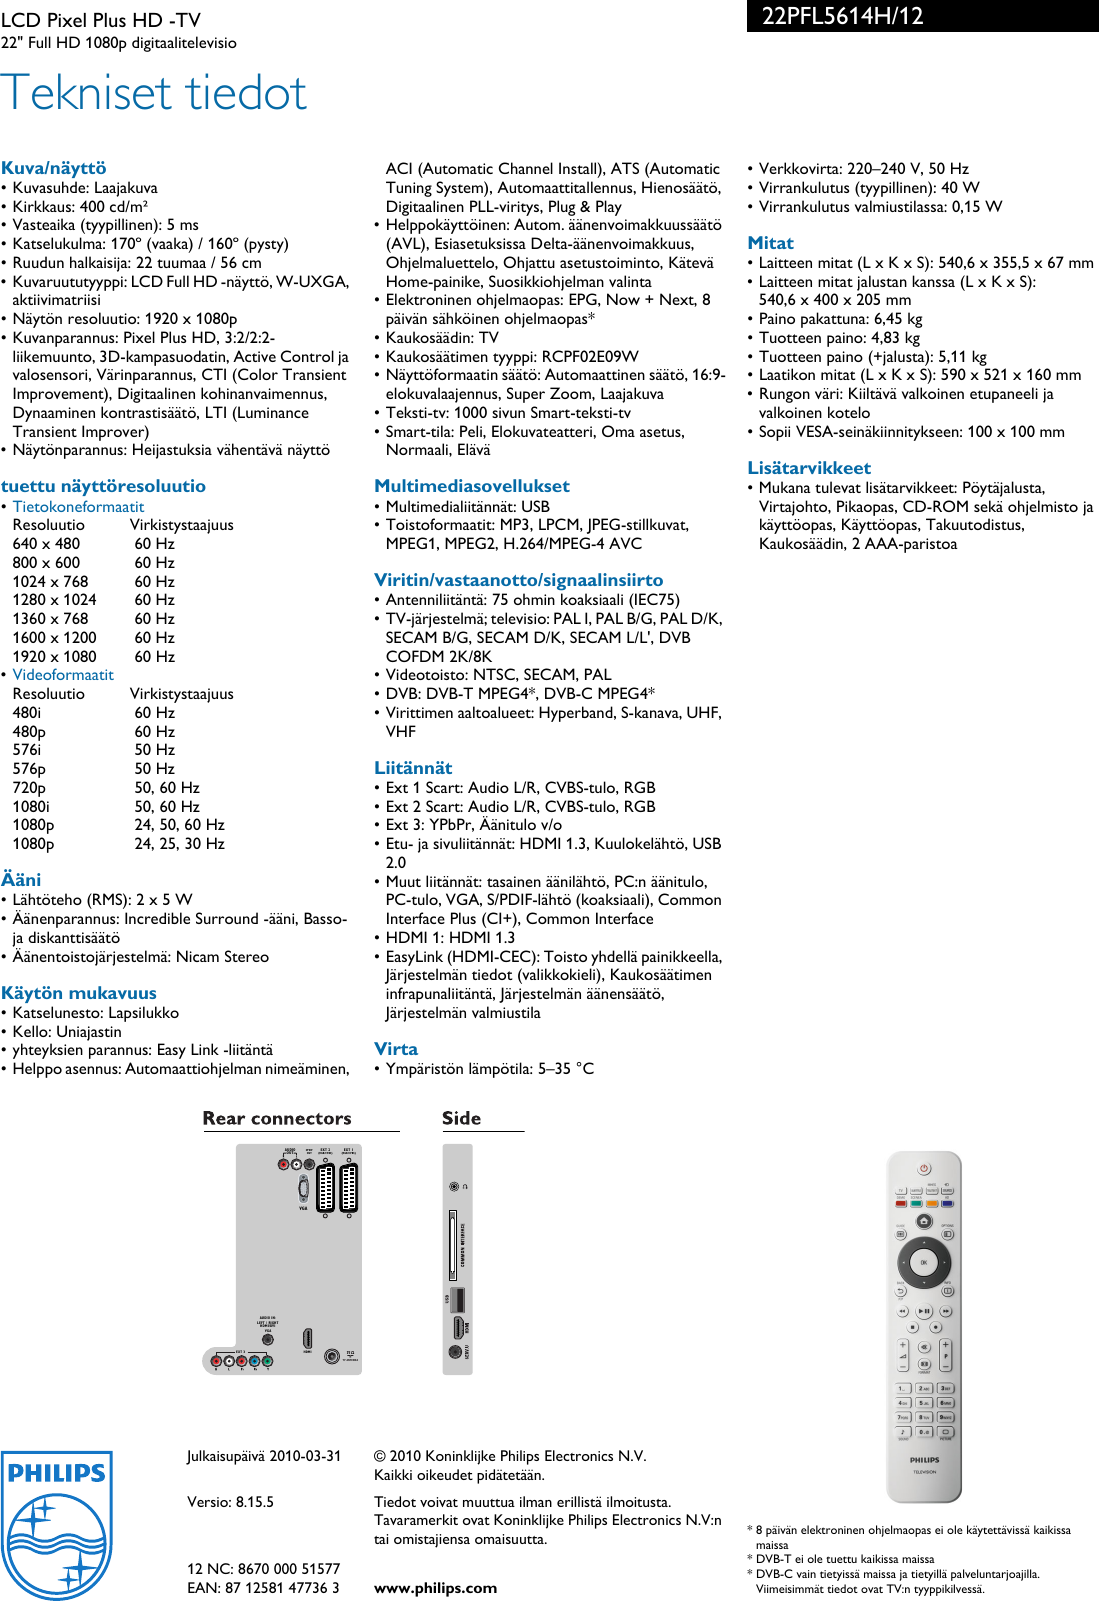 Page 3 of 3 - Philips 22PFL5614H/12 LCD Pixel Plus HD -TV User Manual Esite 22pfl5614h 12 Pss Finfi